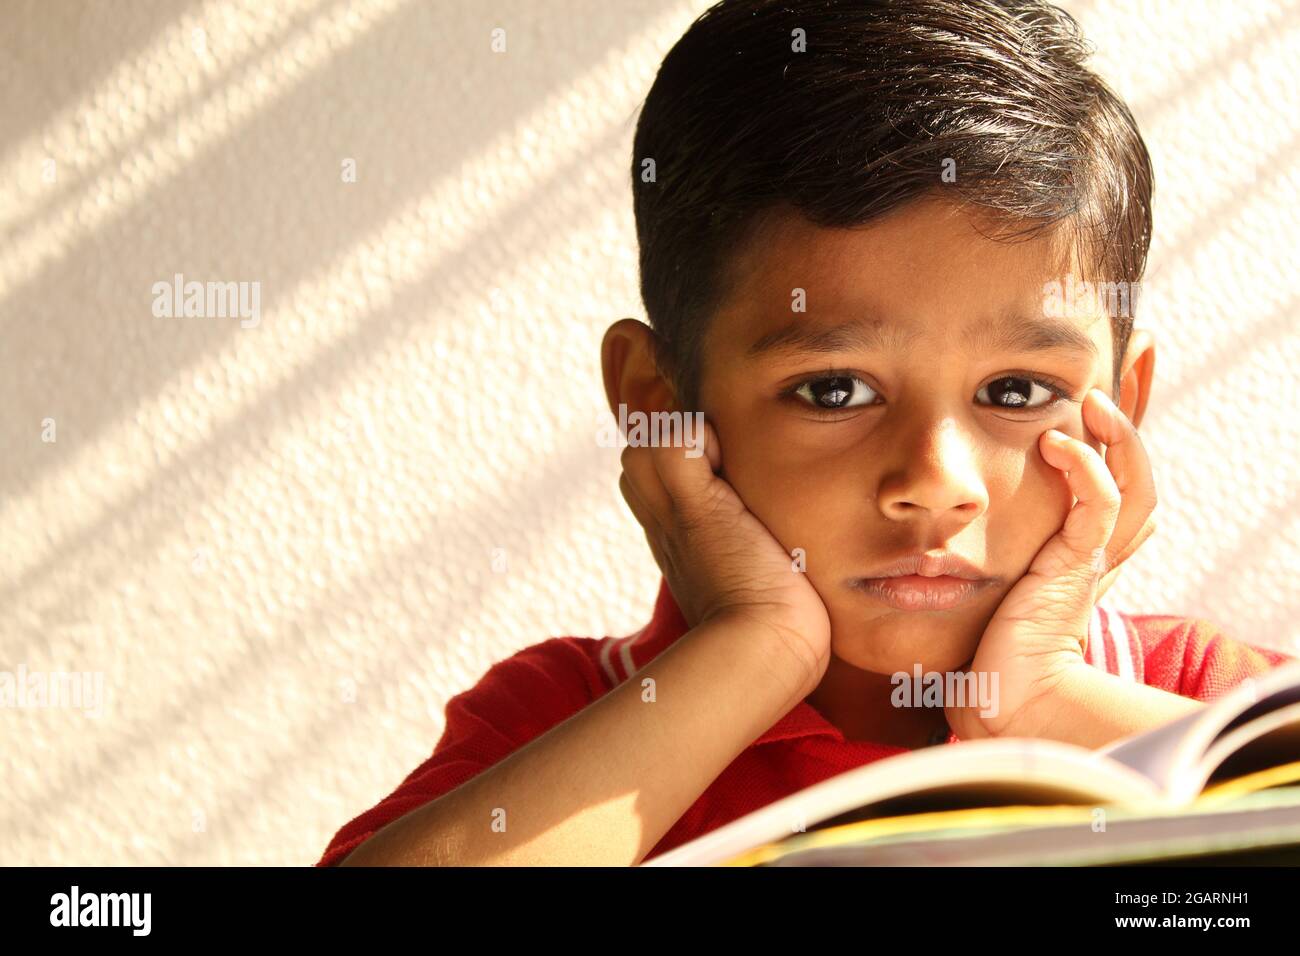 Indian School Kids Students Notebook Writing Study Education In Class,bord Stock Photo